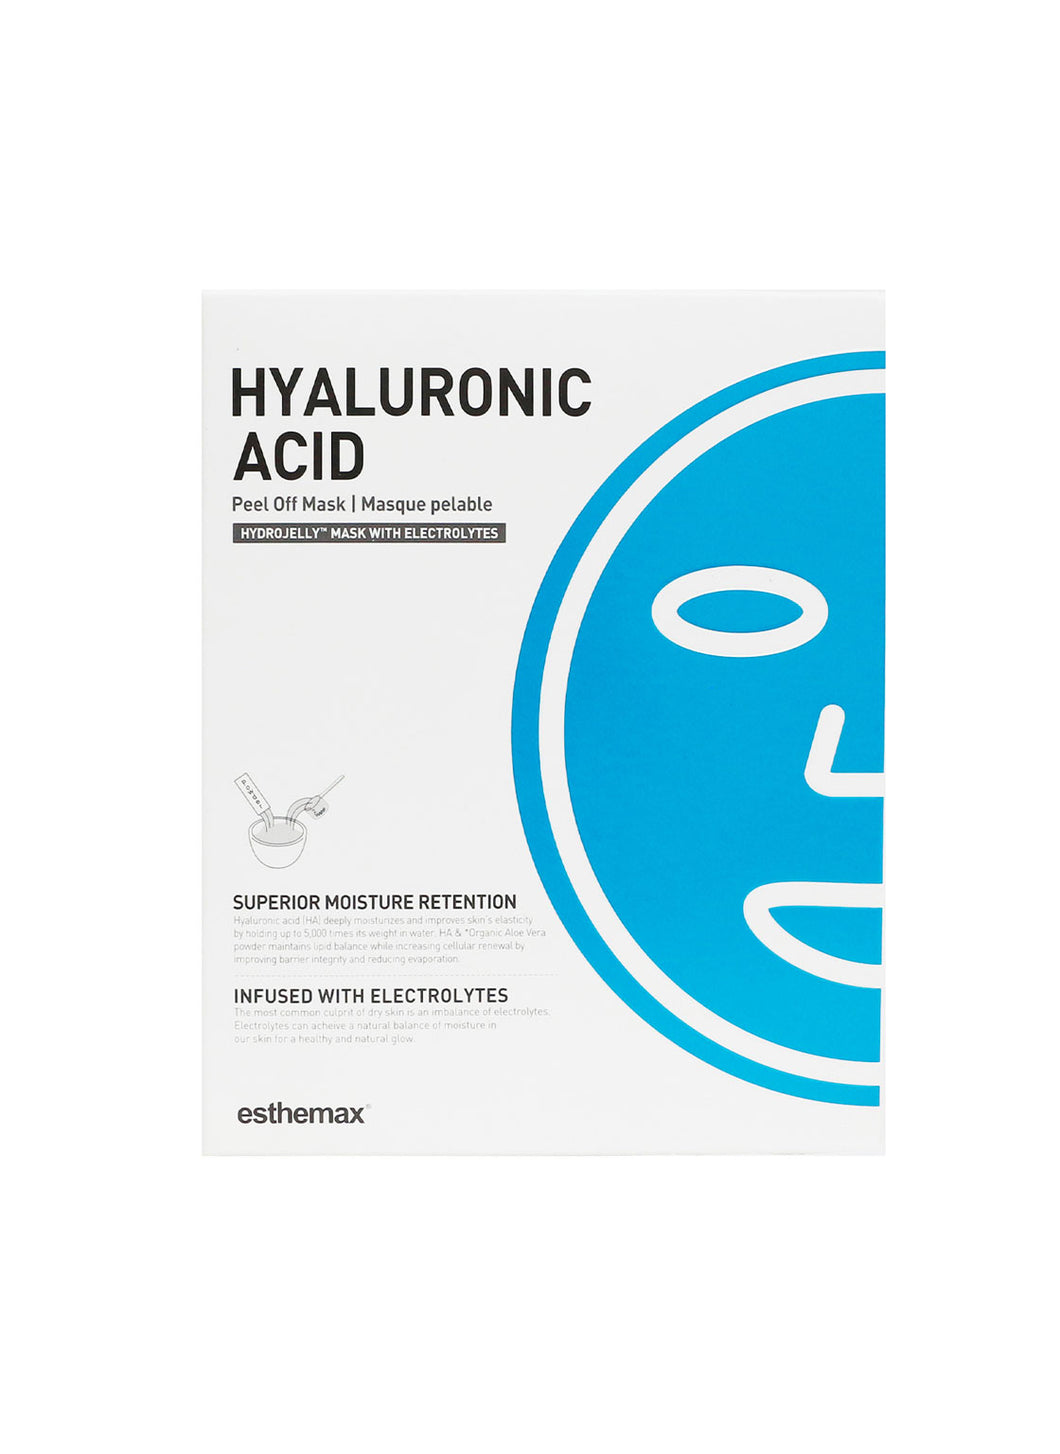 [RETAIL] HYALURONIC ACID HYDROJELLY MASK